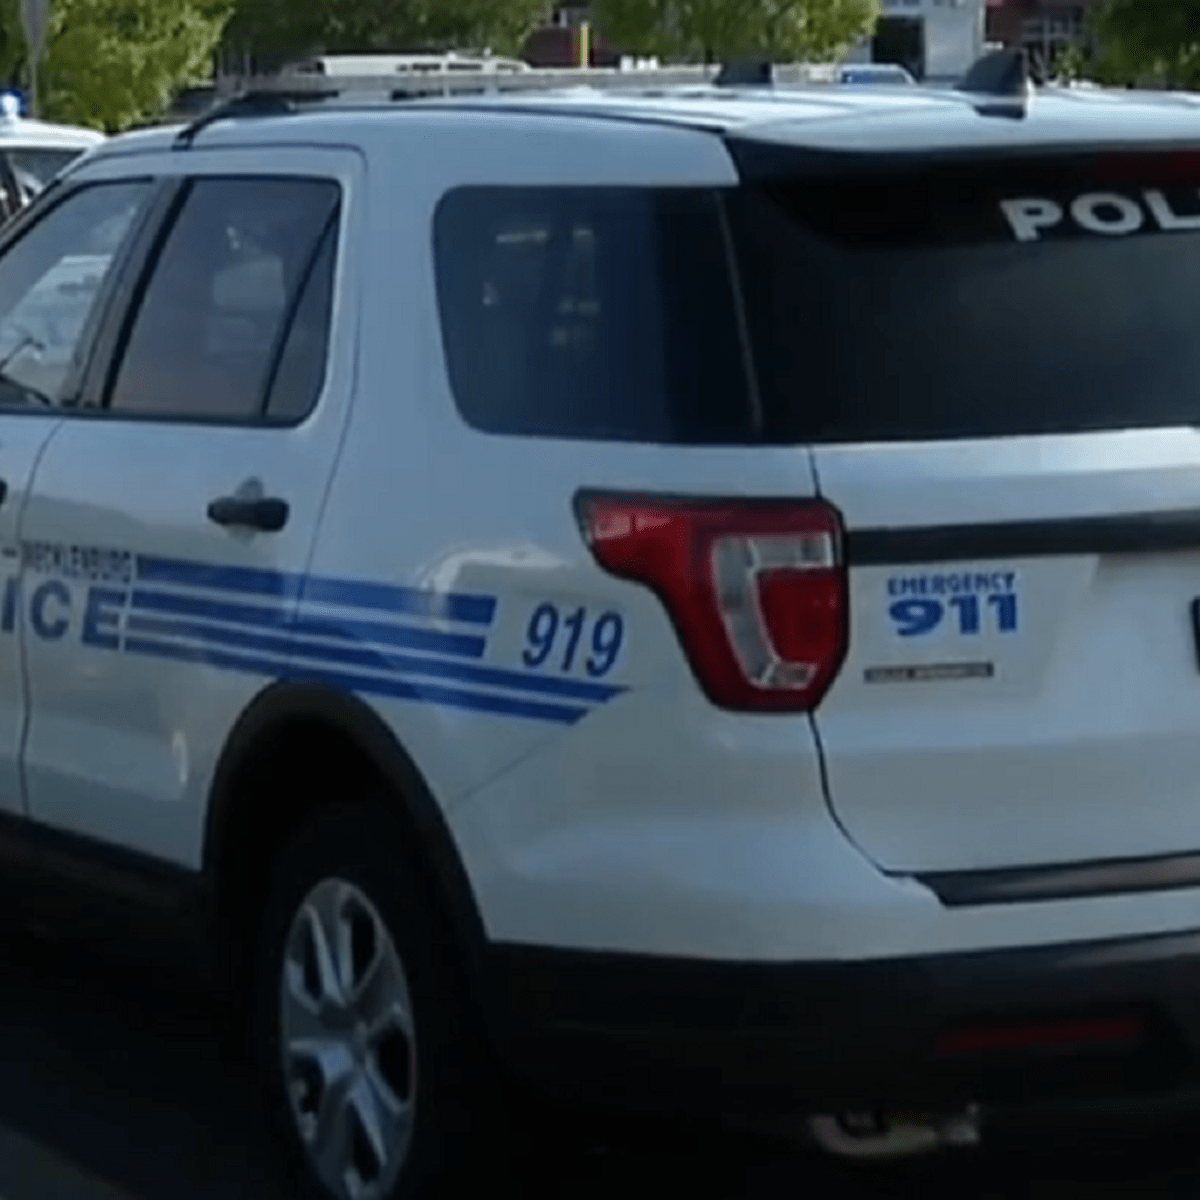 POLICE OFFICER SHOOTS ARMED ROBBERY SUSPECT - Charlotte Alerts